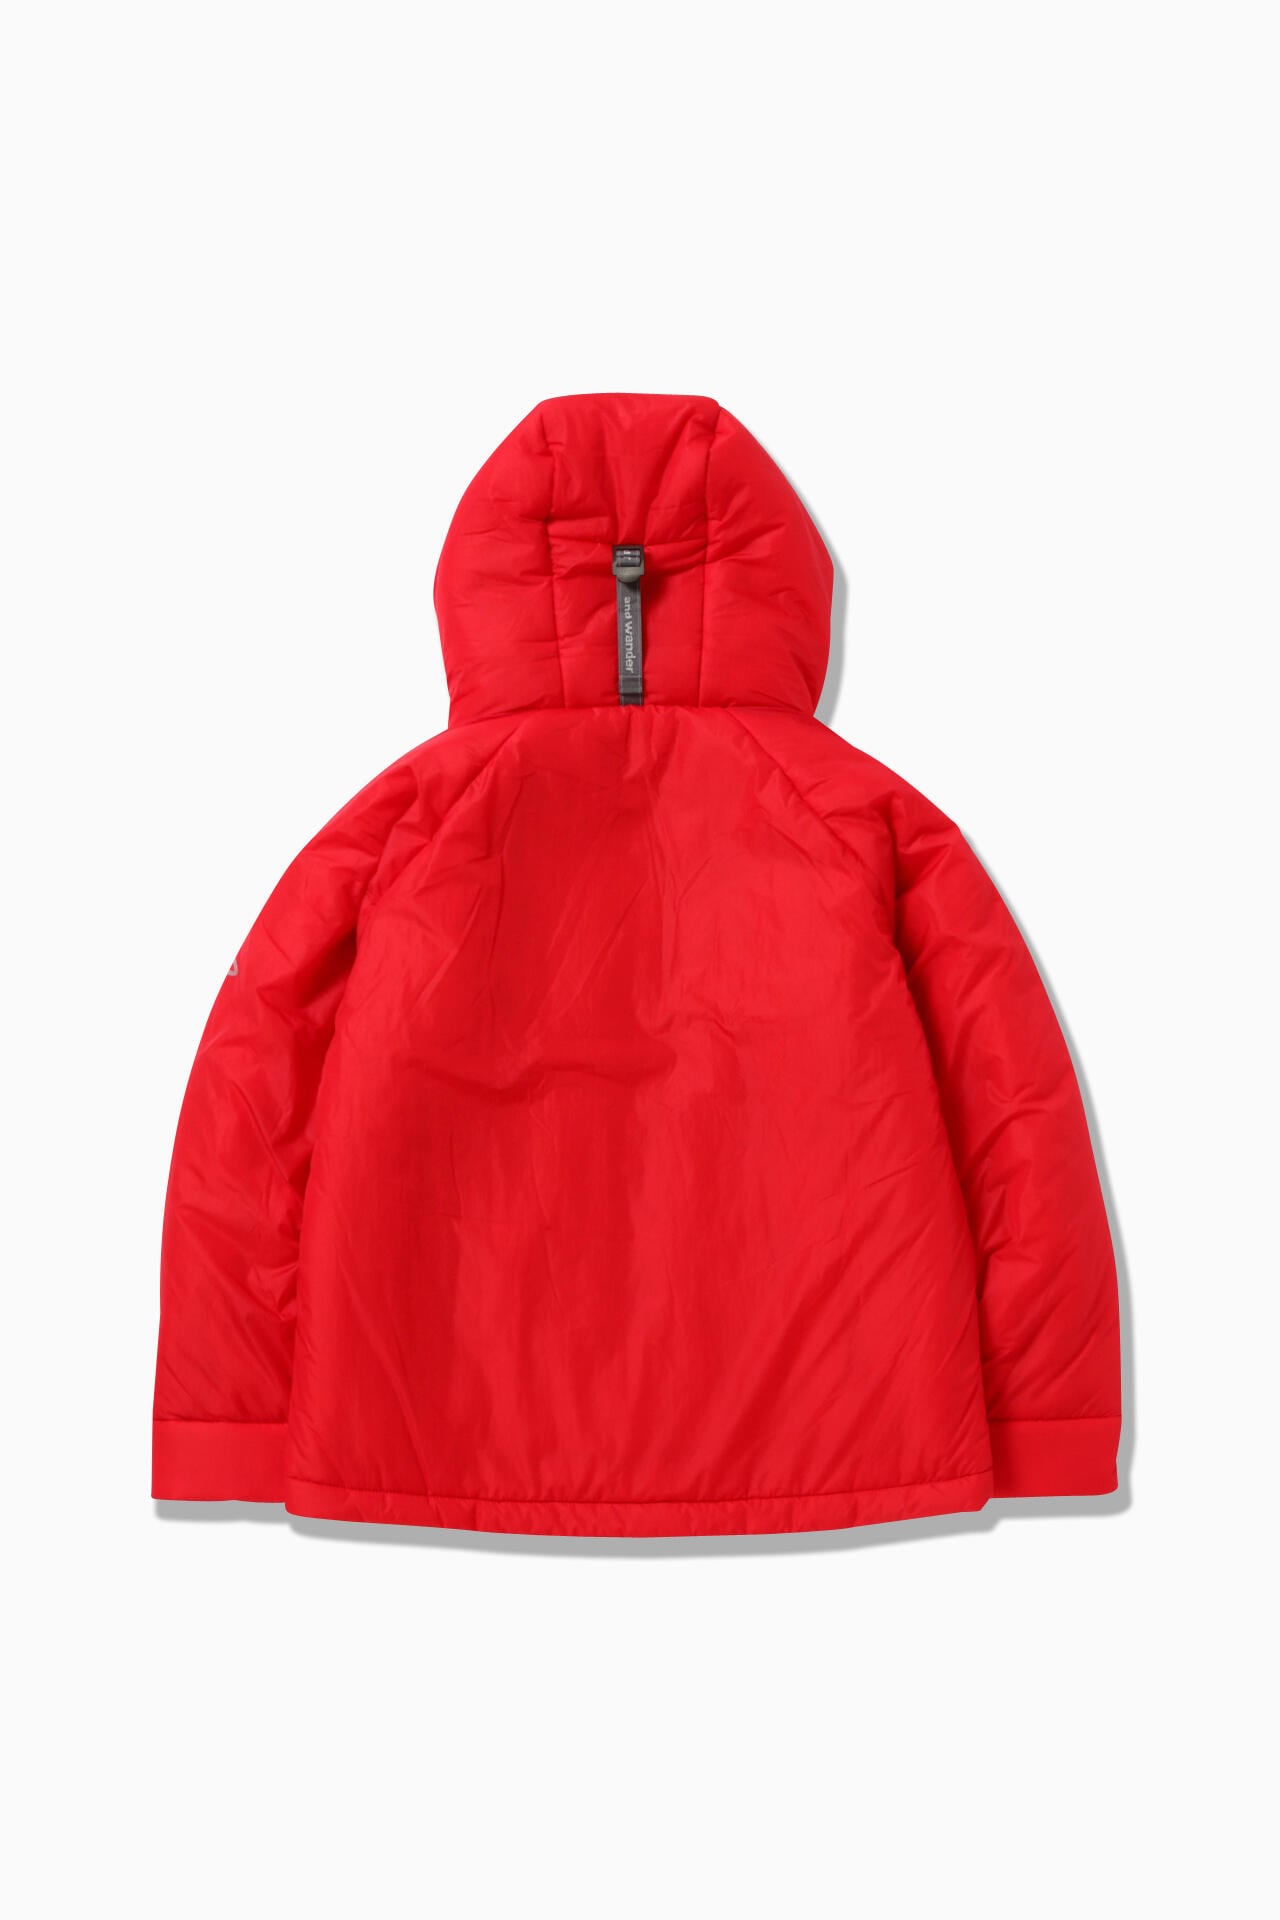 MAISON KITSUNÉ × and wander insulation jacket | outerwear | and 